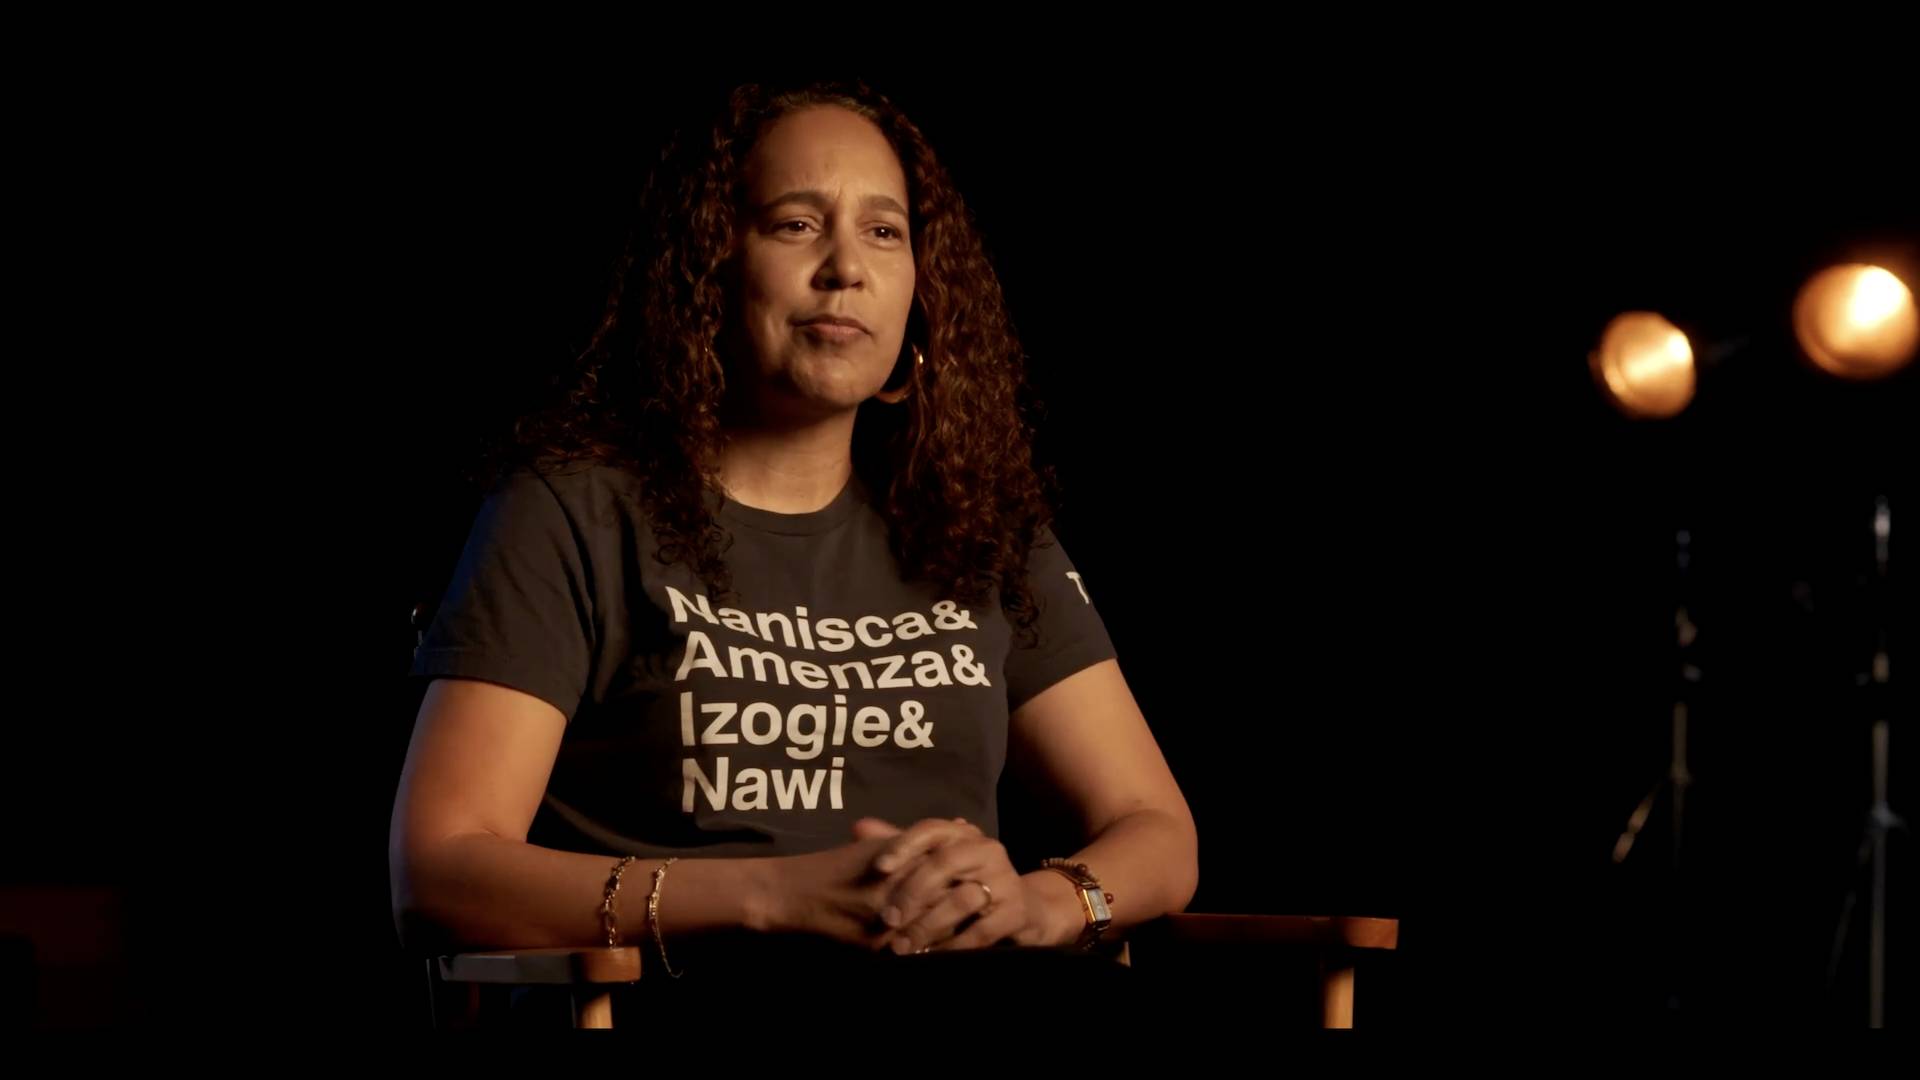 "The Woman King" director Gina Prince-Bythewood, in a black shirt, shares how she creates a safe space on set.